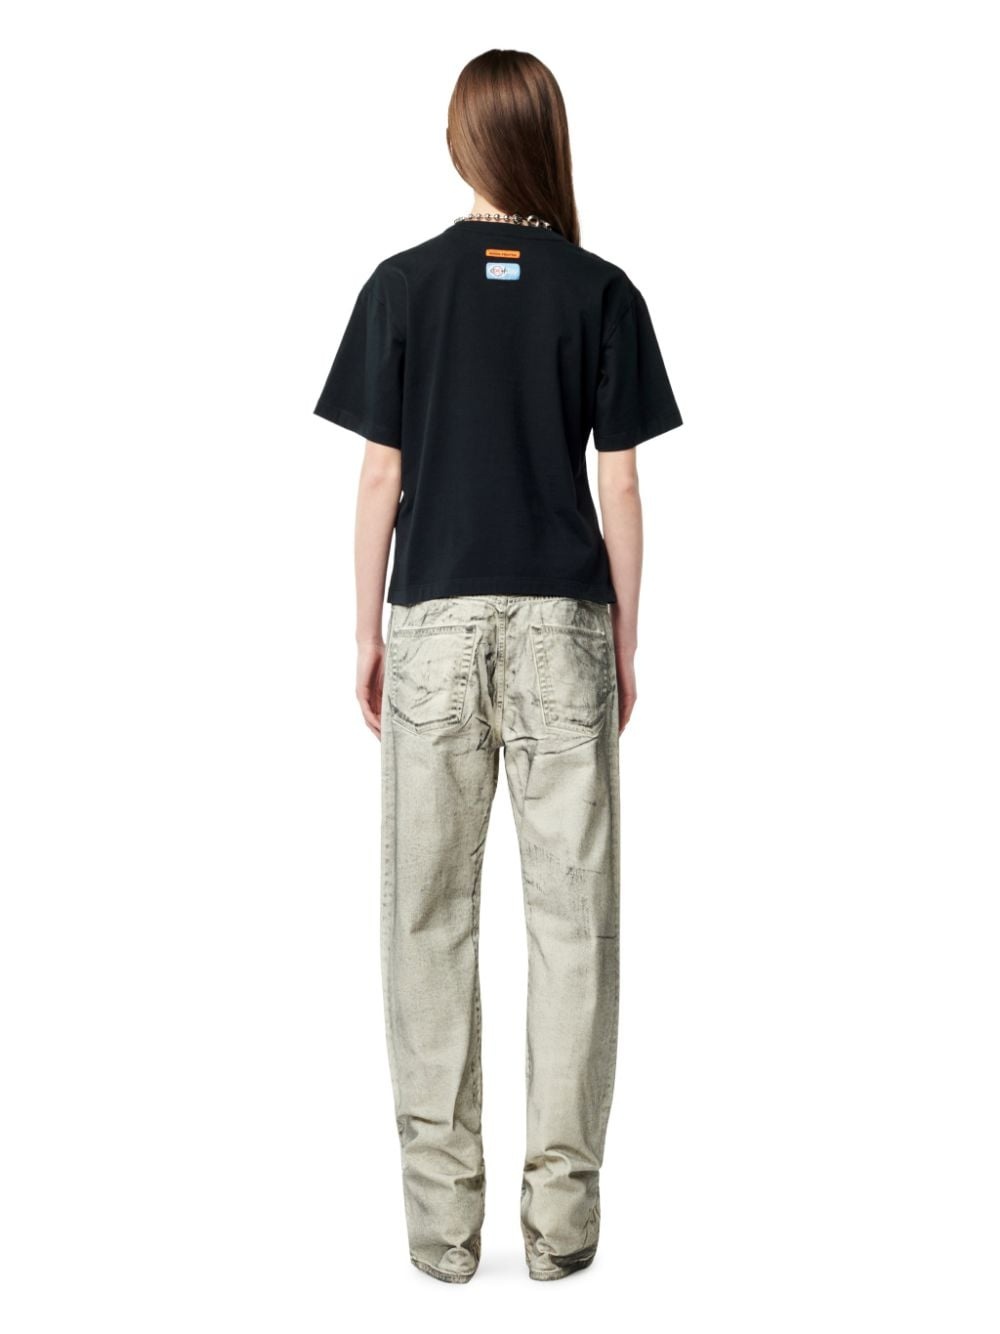 Heron Preston NF EX-RAY RECYCLED CO SS TEE | REVERSIBLE